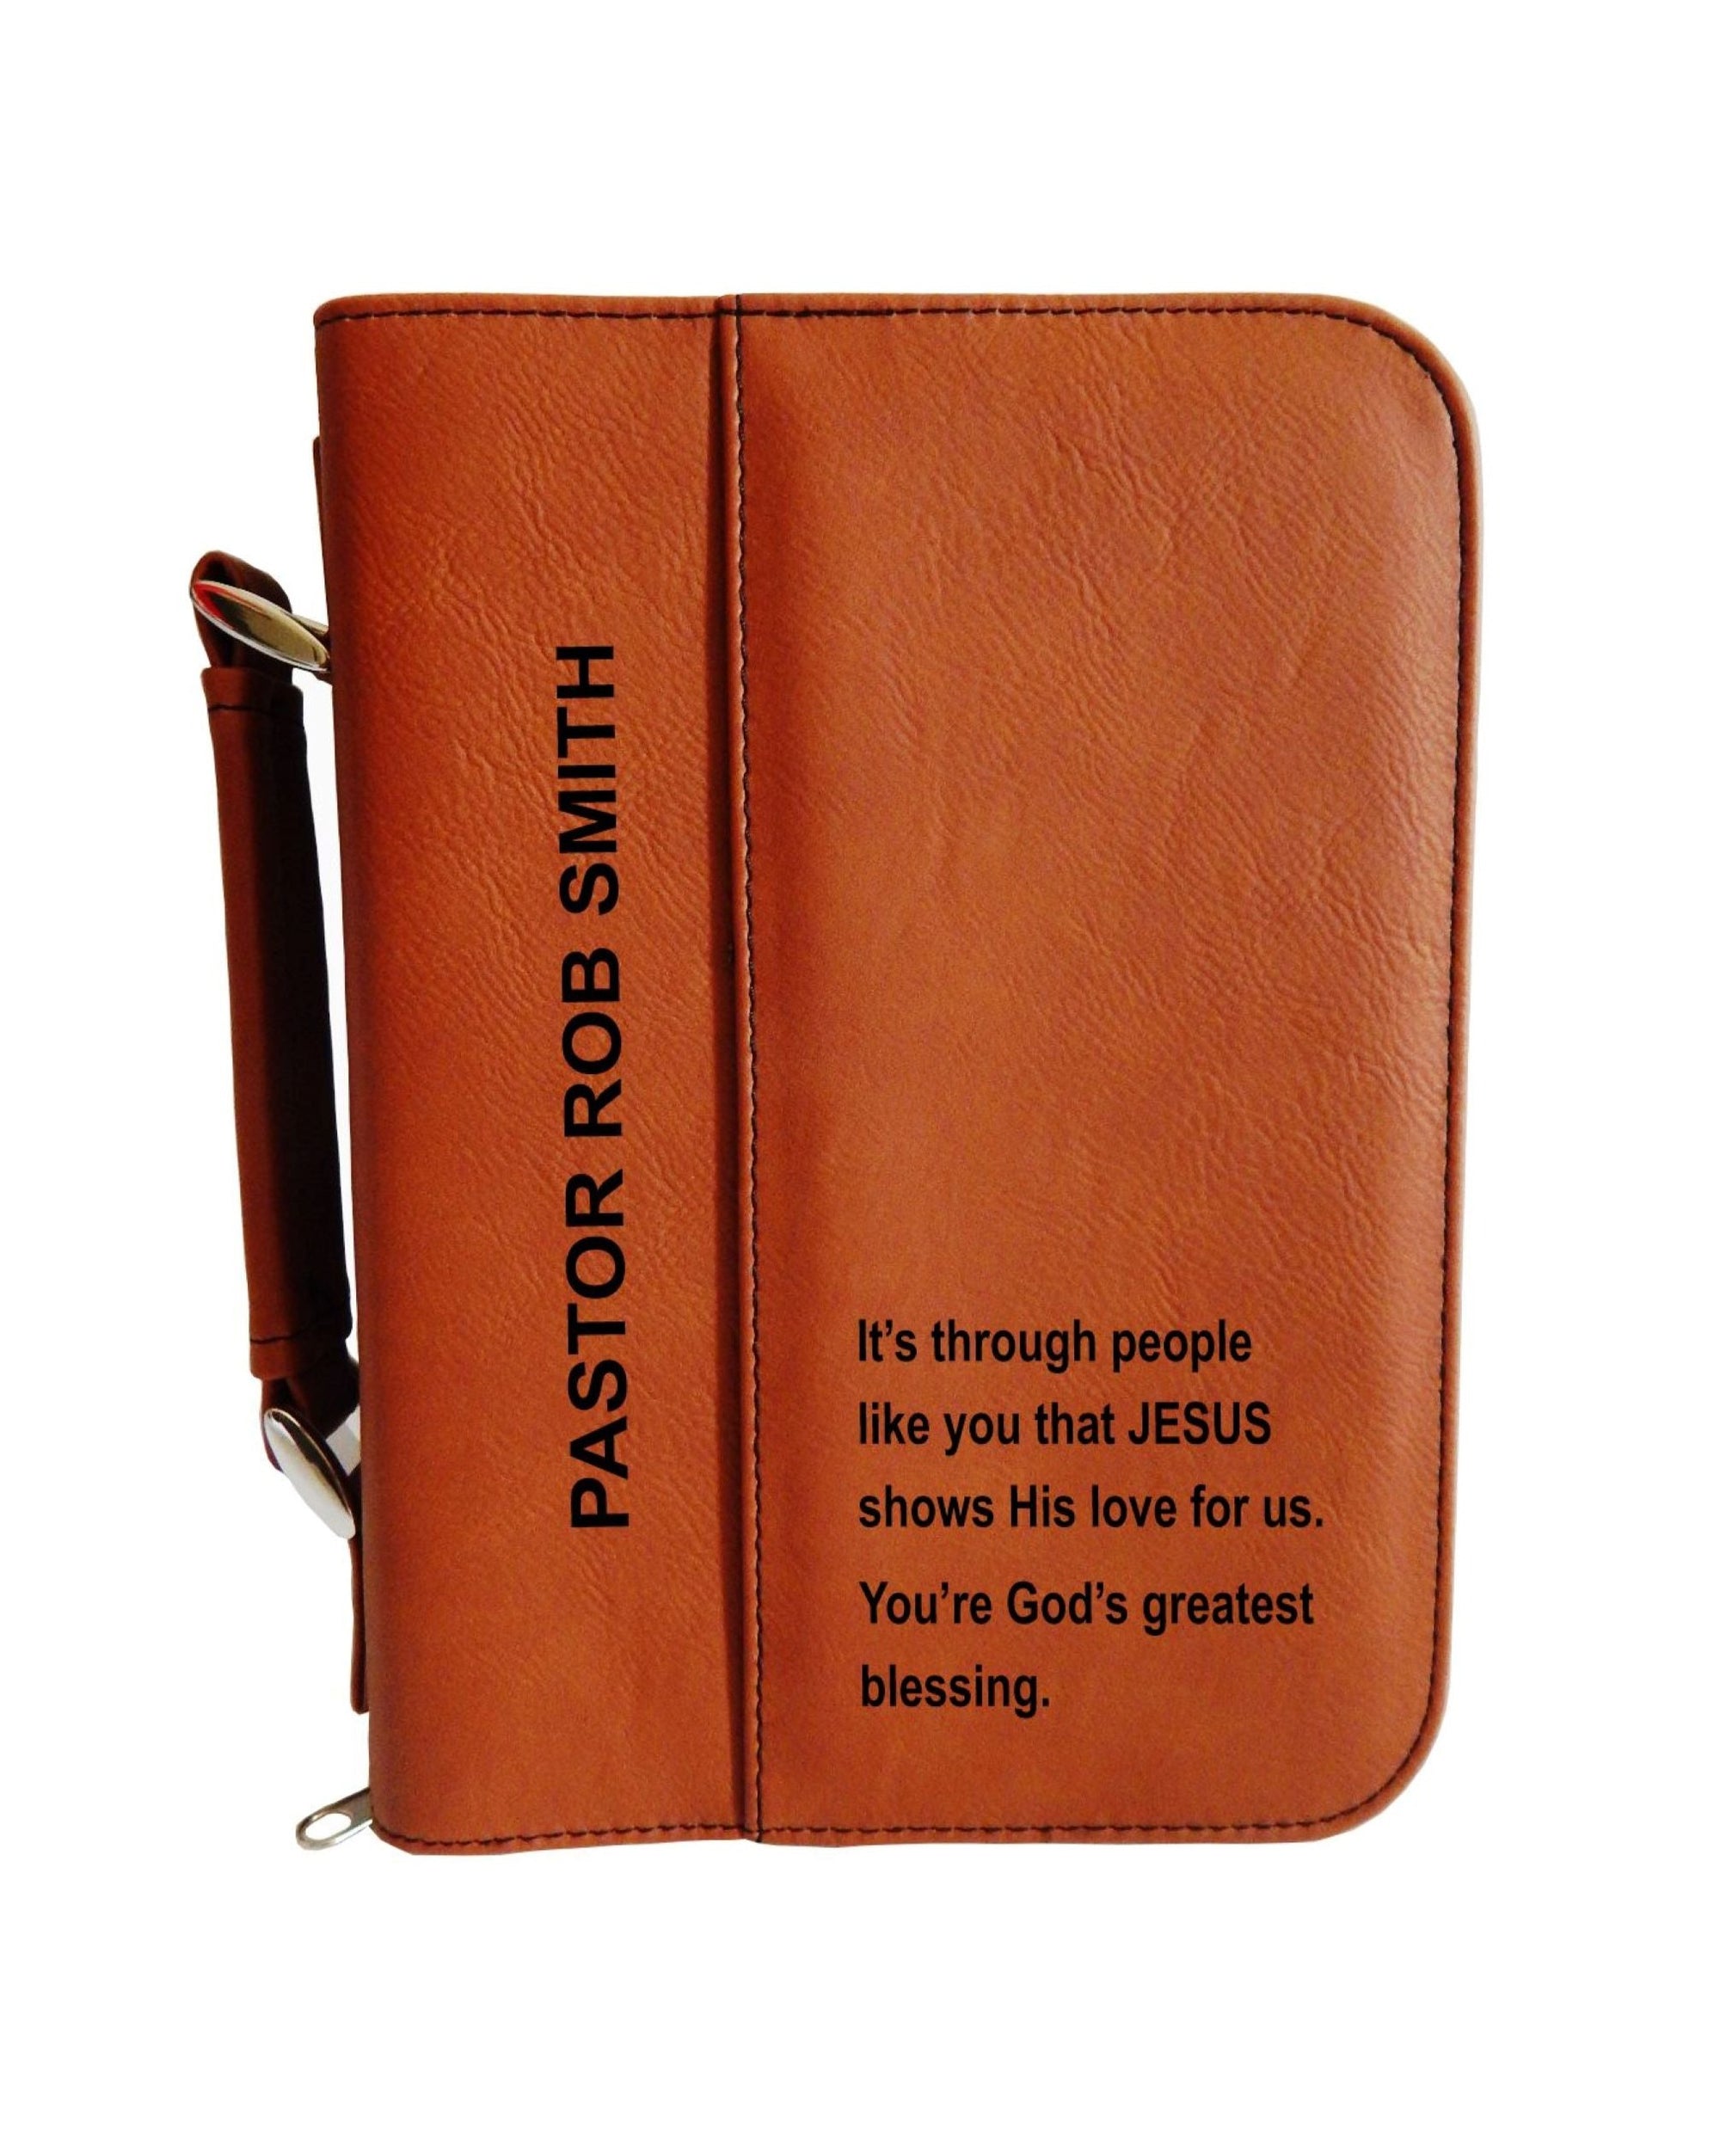 Pastor Appreciation Gift | Wedding Gift | Bible Cover Engraved BCL004